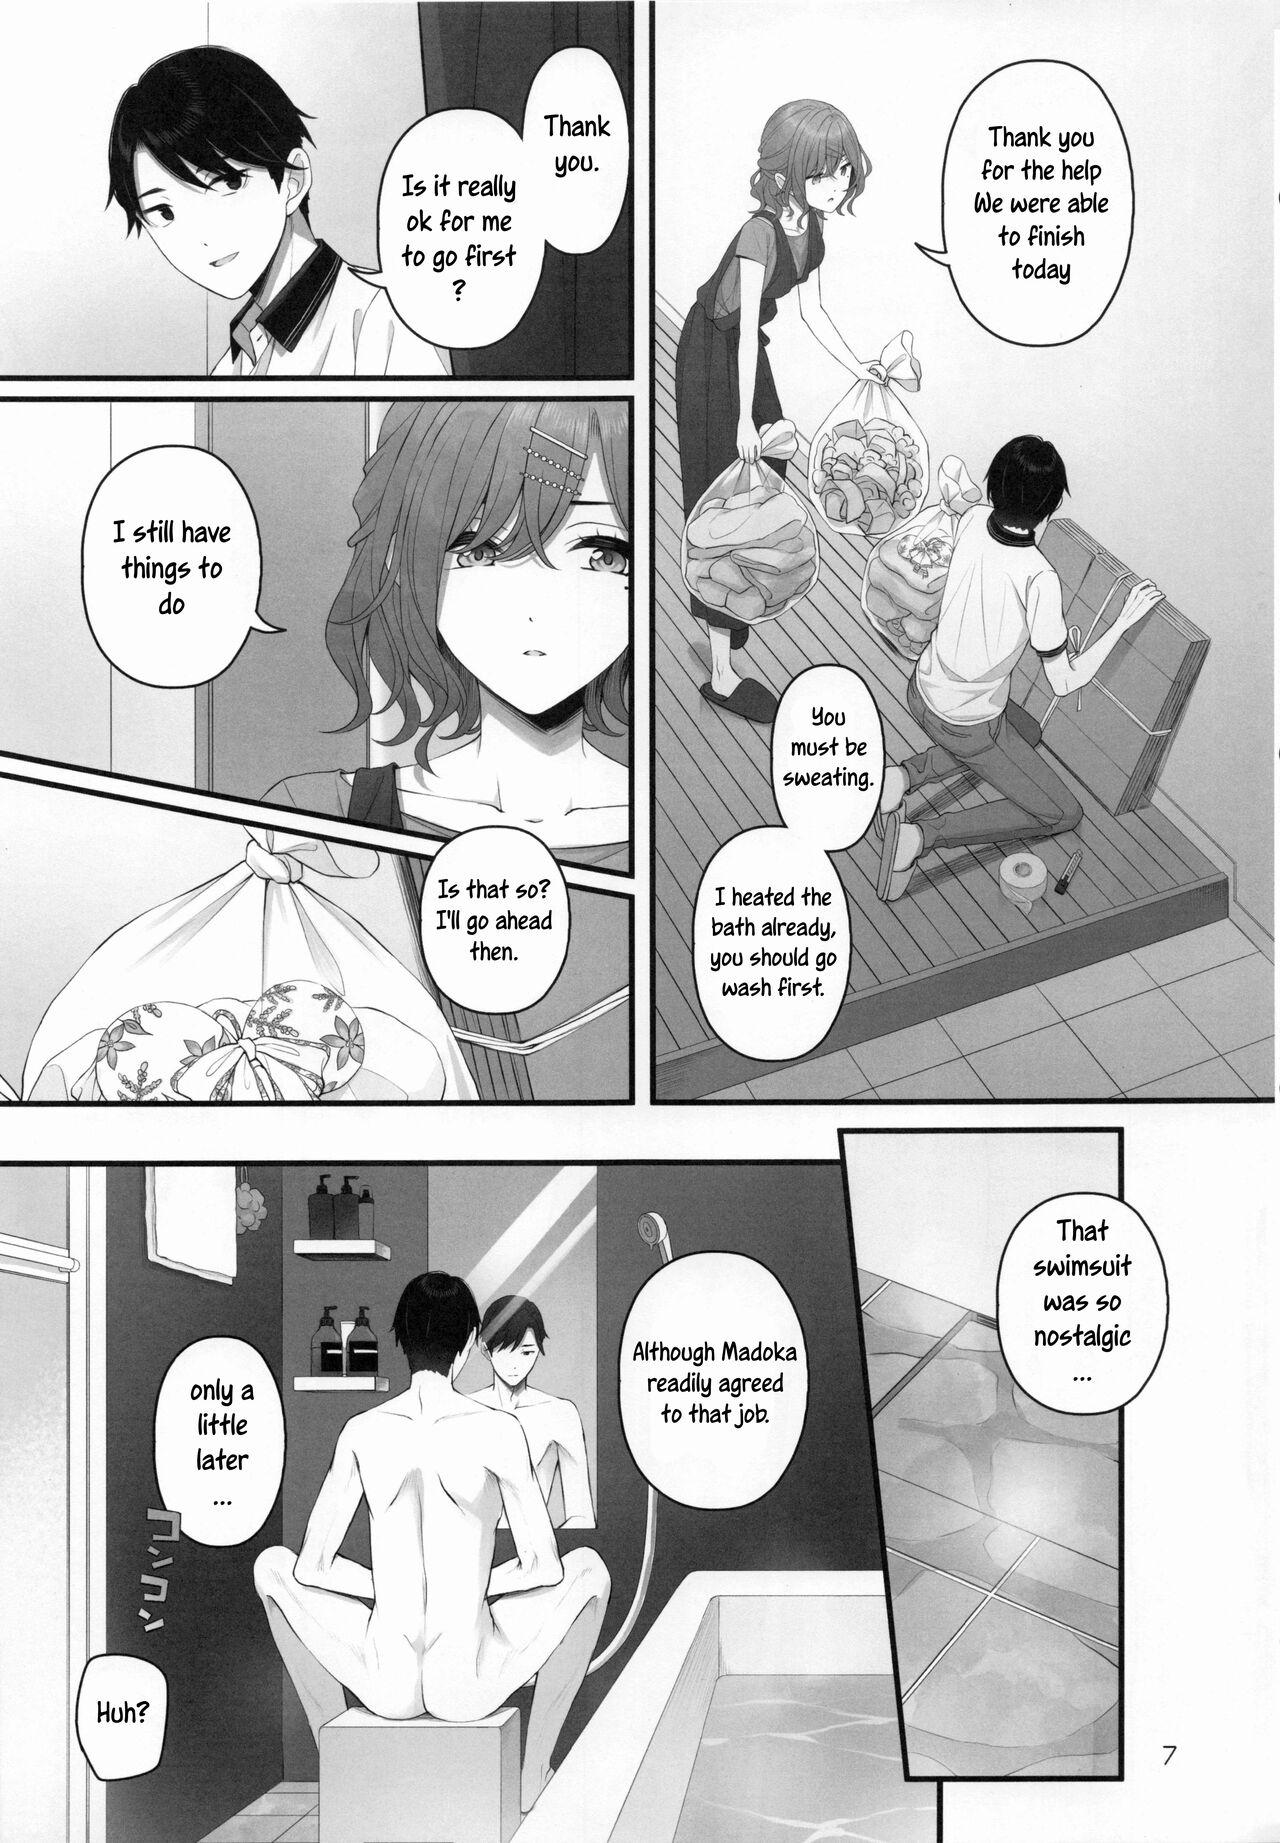 Rub Spit it Out! - The idolmaster Muslim - Page 7